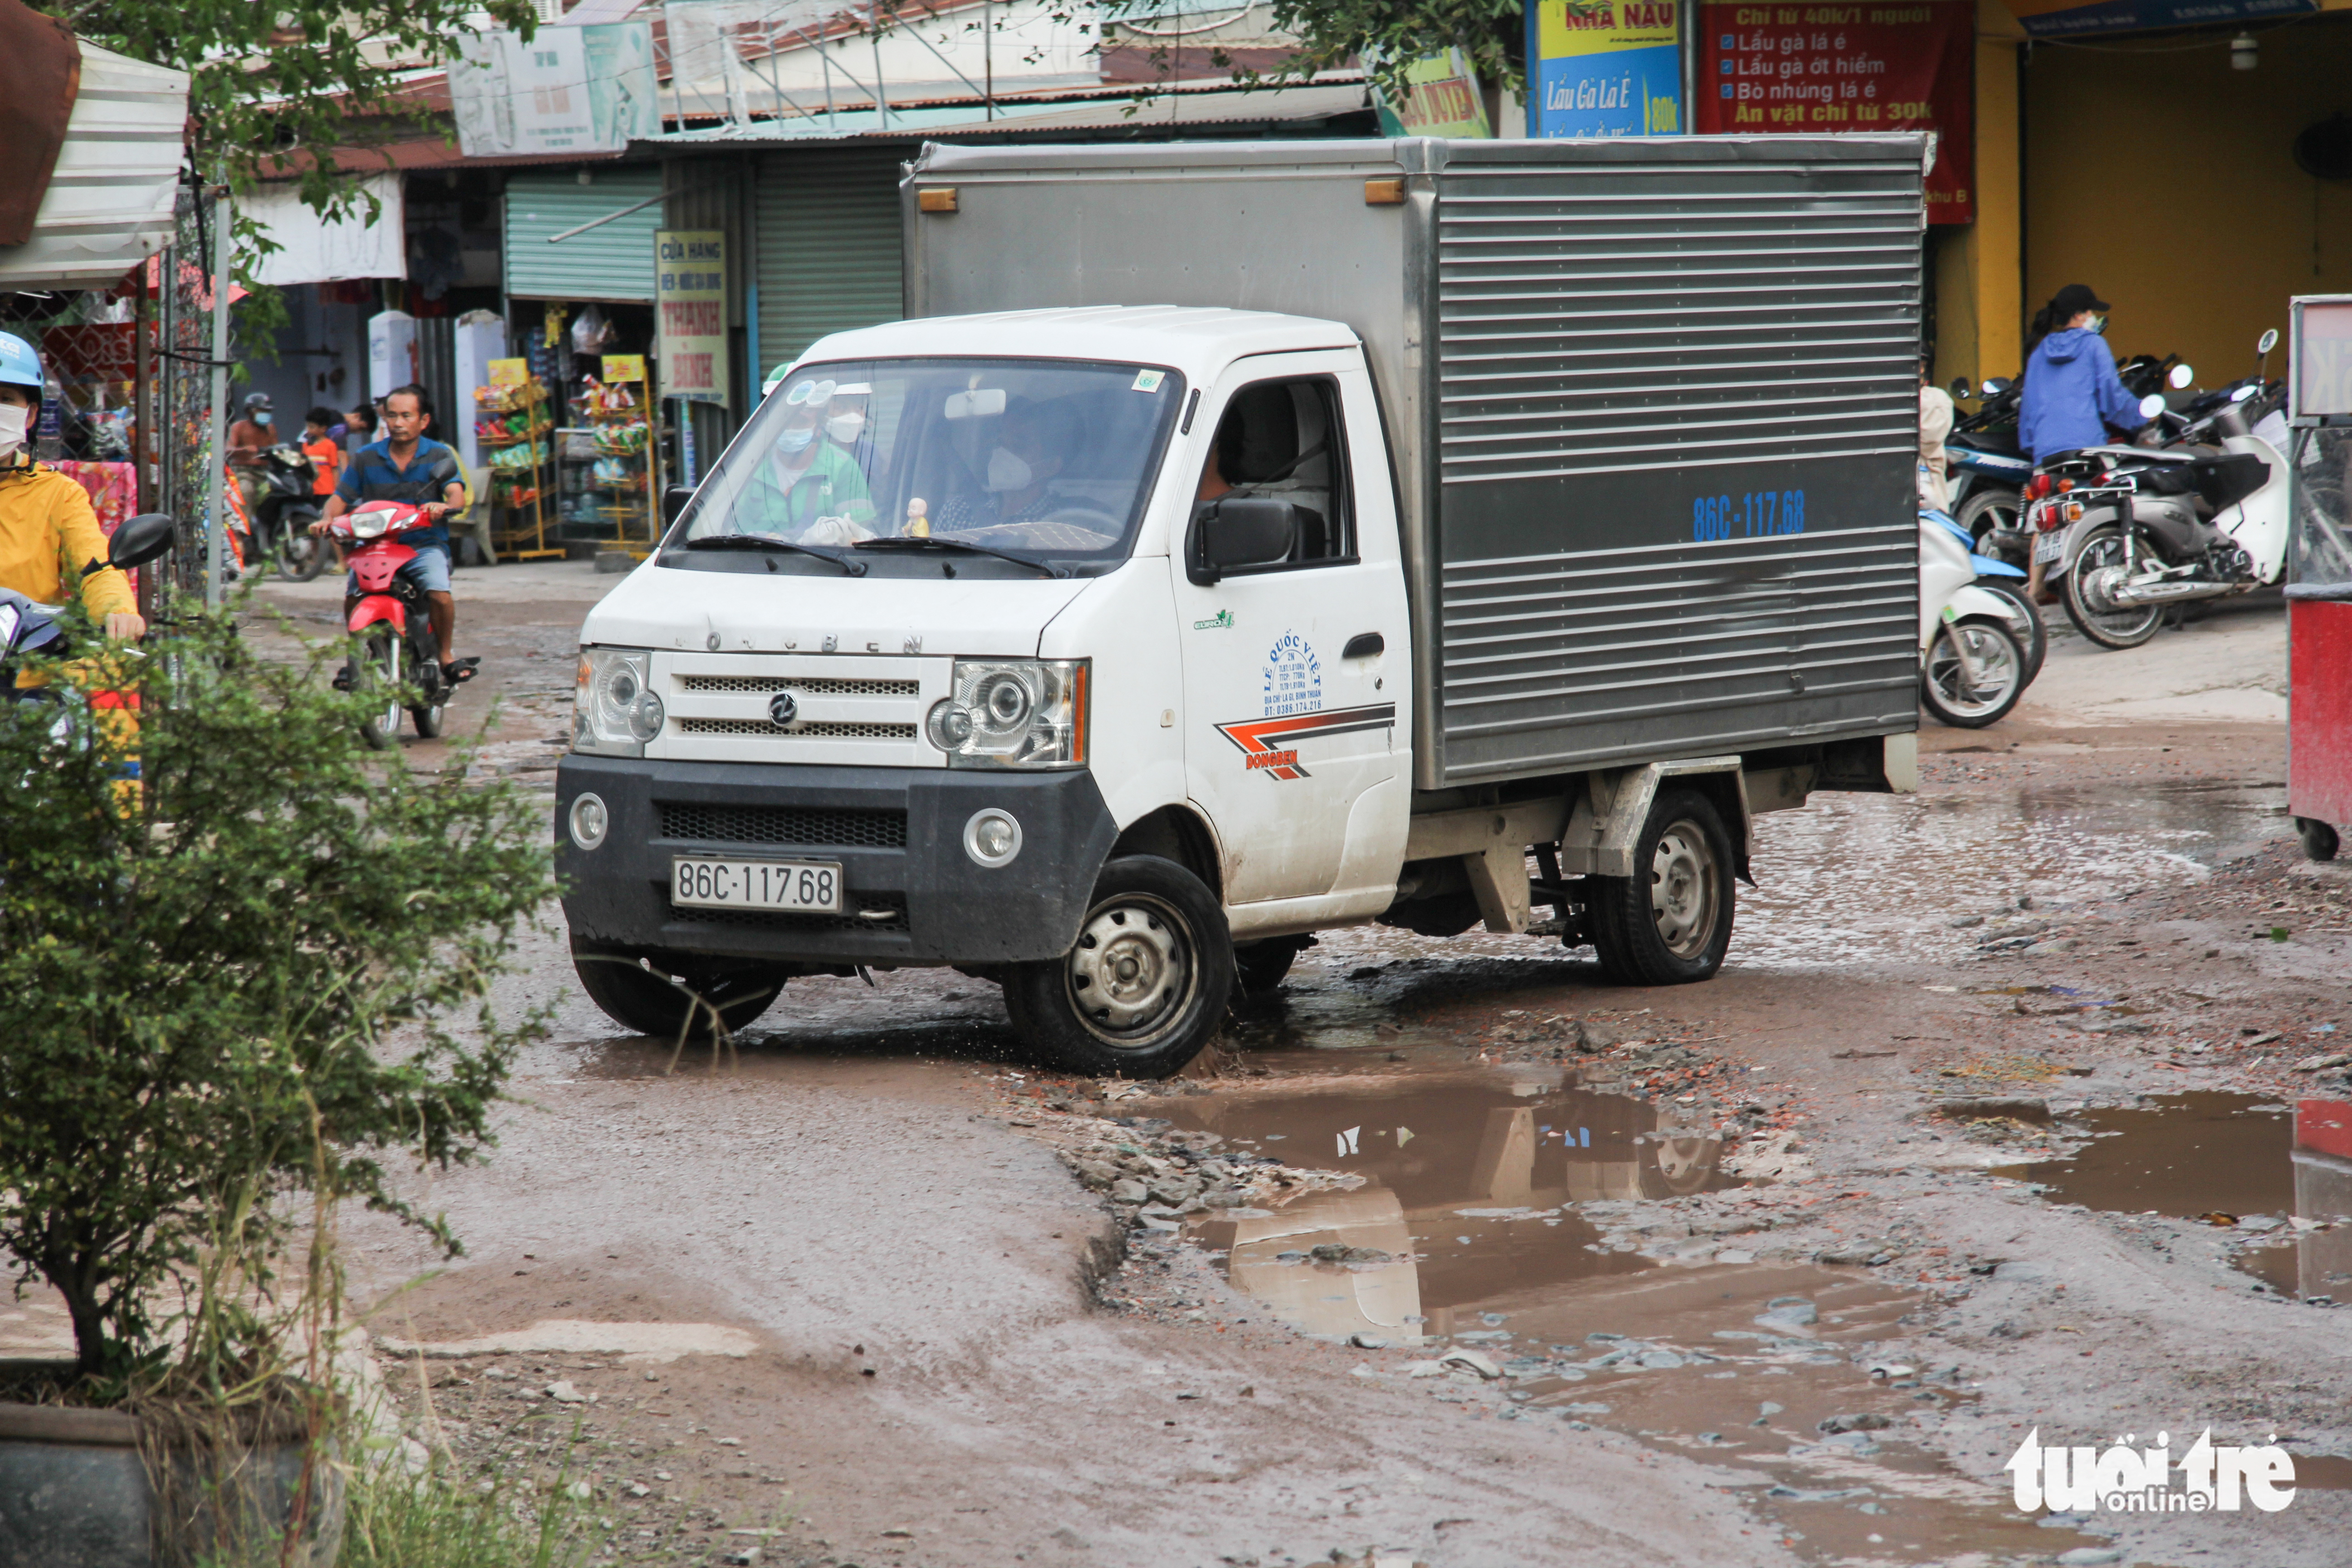 A mini truck is to turn away after facing giant potholes on To Vinh Dien Street in the complex of universities under the Vietnam National University-Ho Chi Minh City in Binh Duong Province, Vietnam. Photo: Kieu Hanh / Tuoi Tre